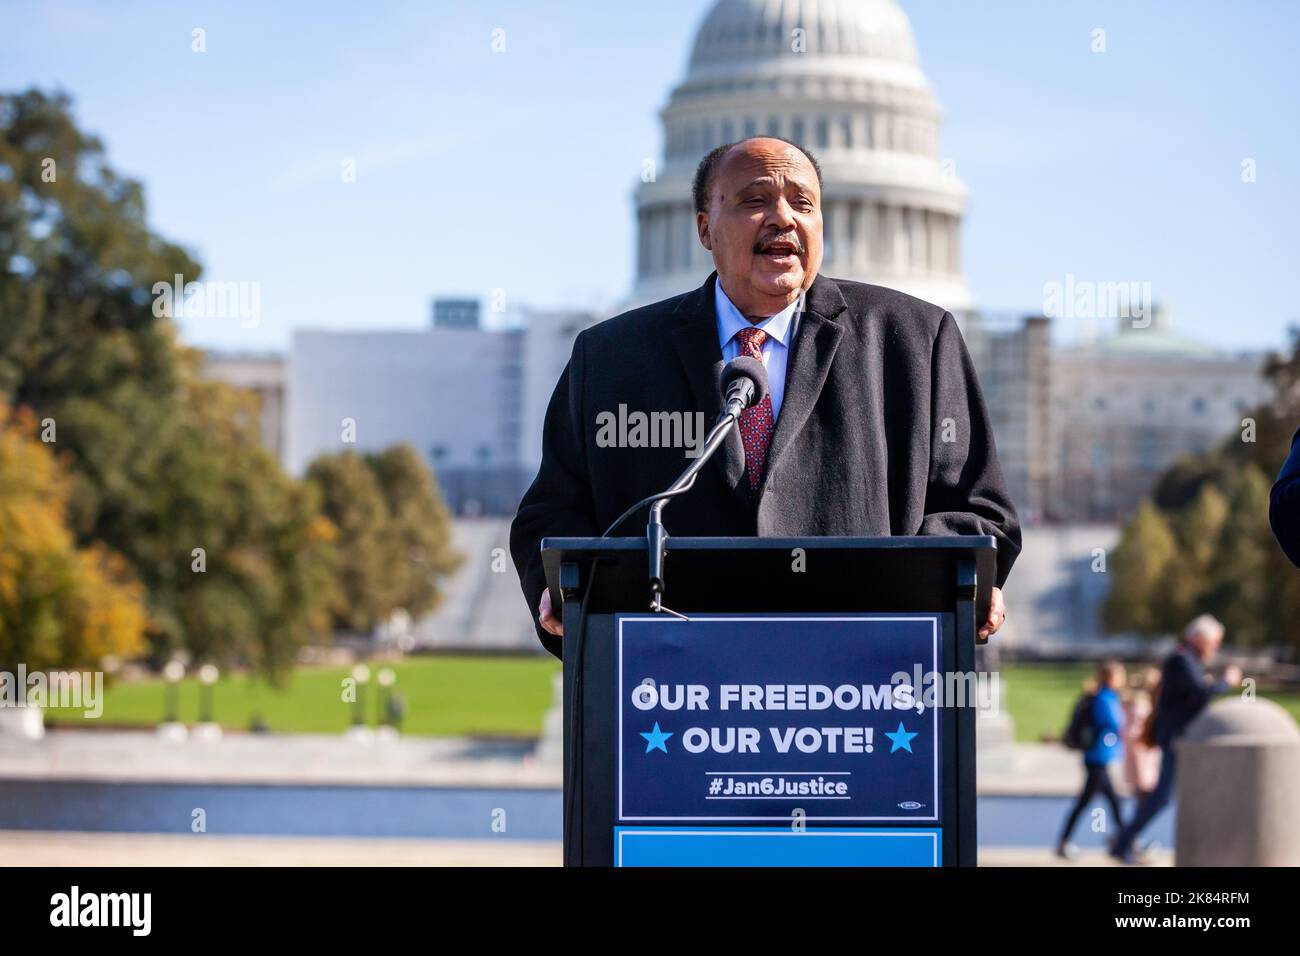 Martin Luther King III speaks at a rally calling for protection and respect for voters, voting, and election workers. The event was one of more than 75 nationwide hosted by Public Citizen Democracy Campaign to demand free and fair elections and justice for the violent January 6, 2021, attack on democracy. Trump's efforts to overturn the results of the 2020 election have undermined faith in election integrity among millions of Americans, posing a serious threat to democracy in the United States. (Photo by Allison Bailey/SOPA Images/Sipa USA) Stock Photo